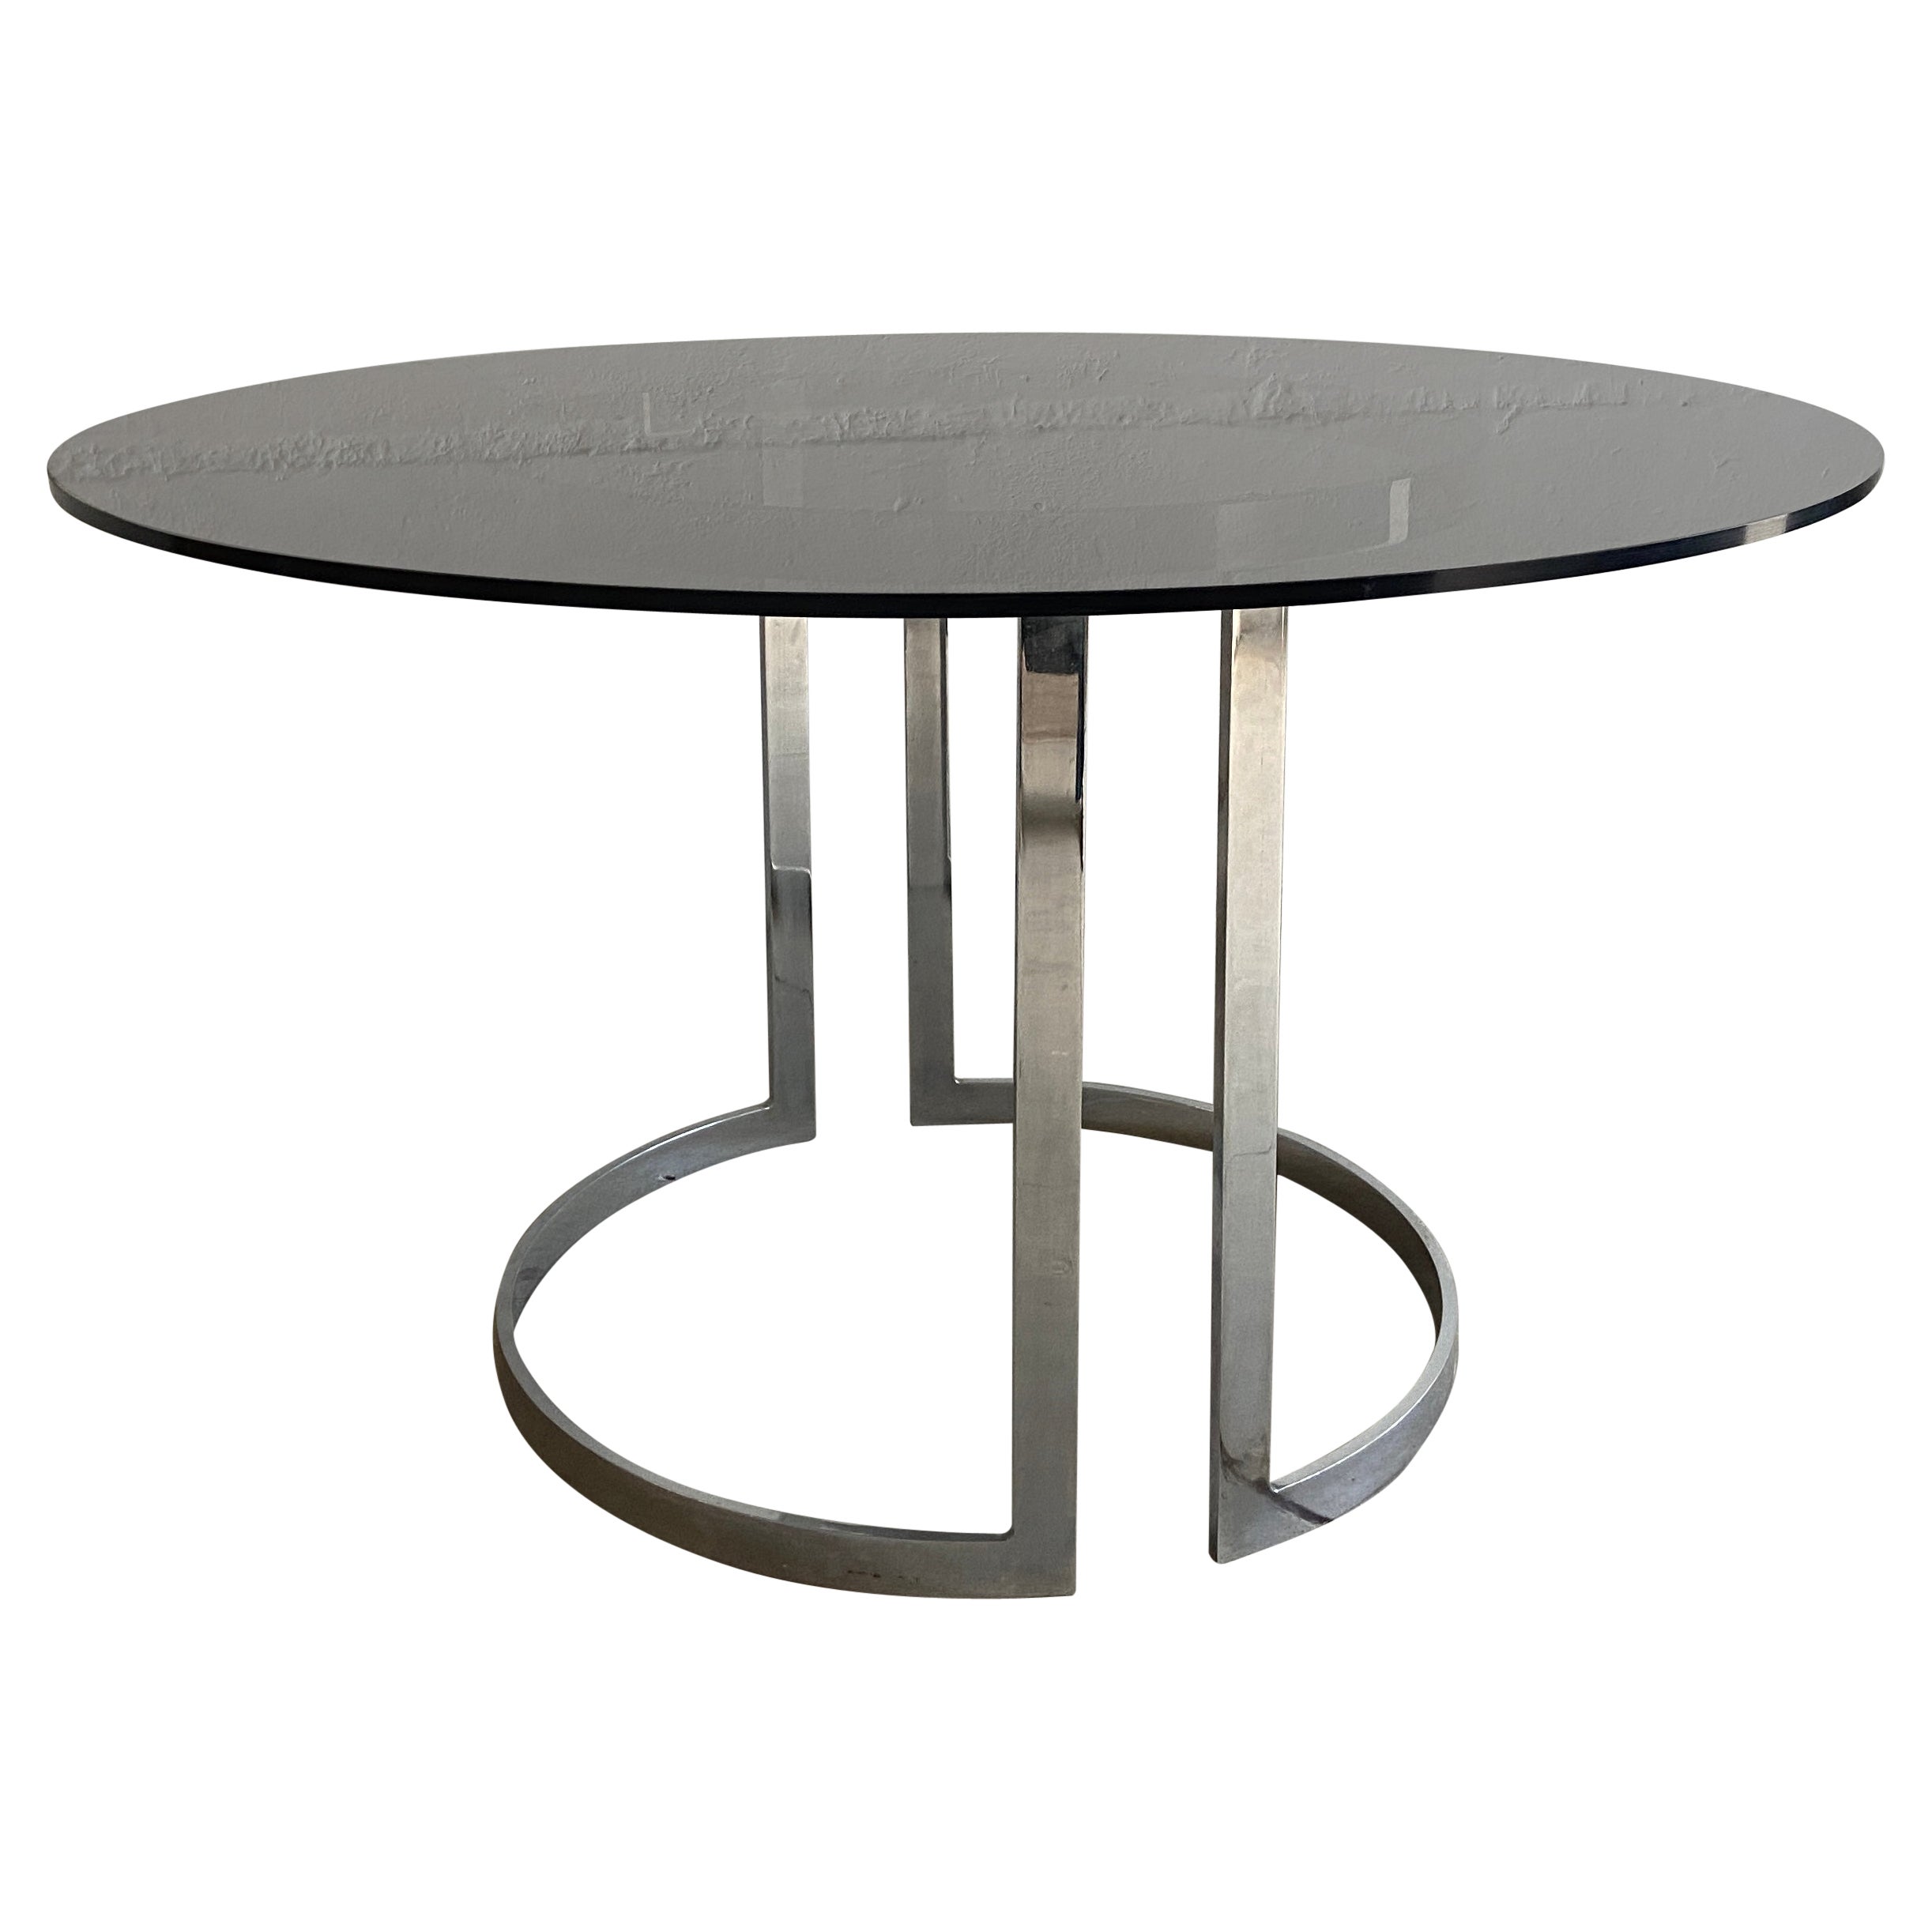 Mid-Century Modern Italian Chrome Dining Table with Smoked Glass Top, 1970s